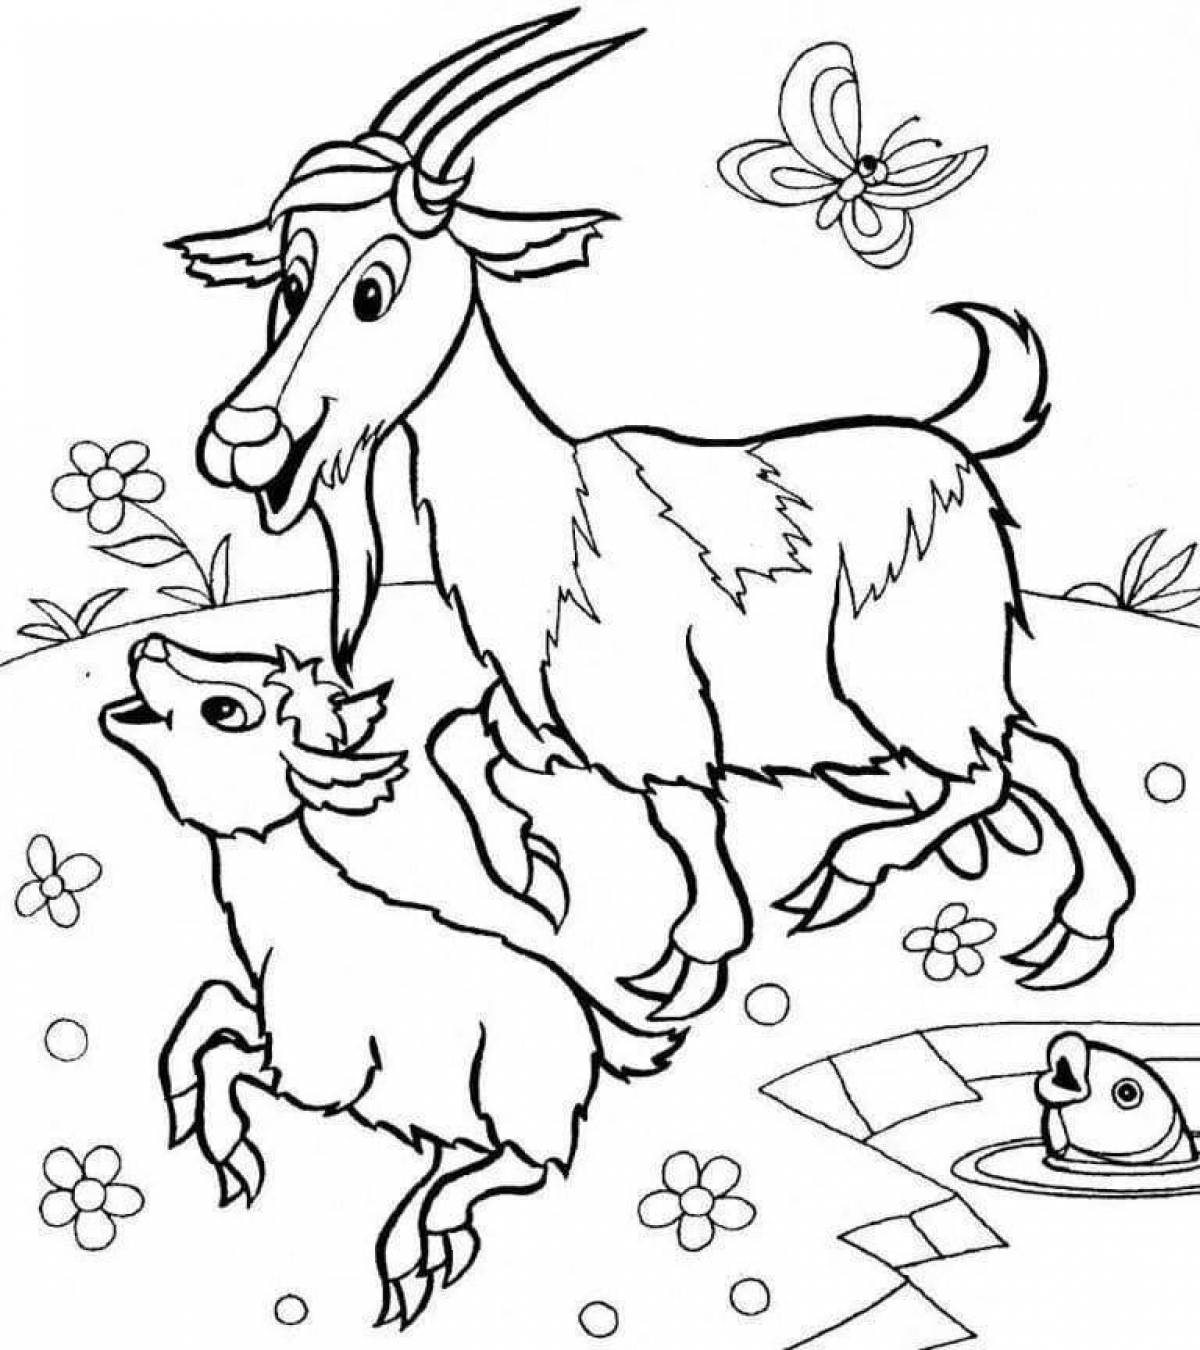 Charming coloring book for children 5 years old pets